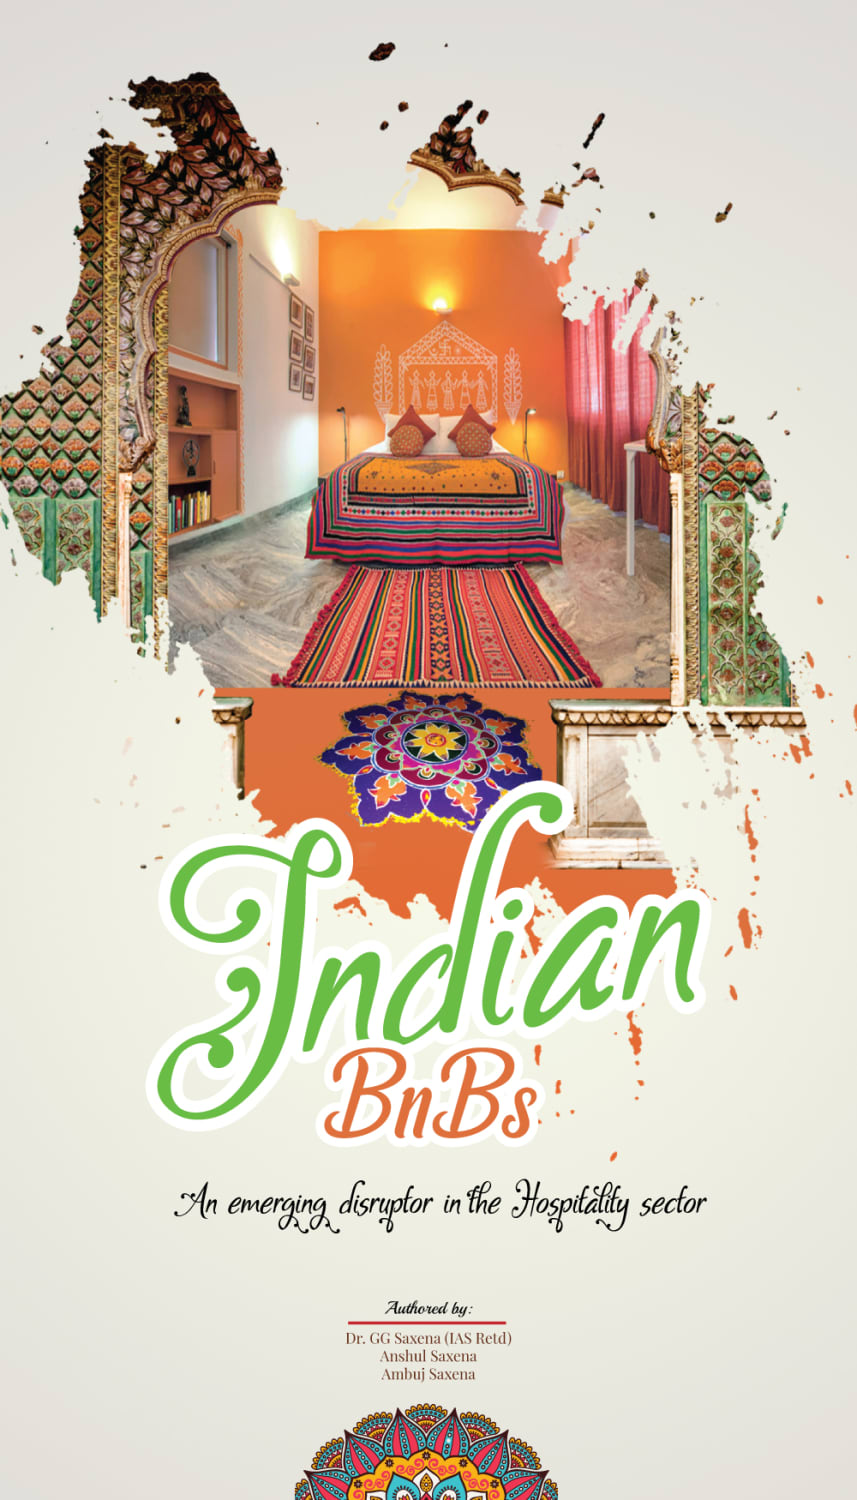 Here is all you need to know about Indian Bed and Breakfast accommodations / Indian Homestays!